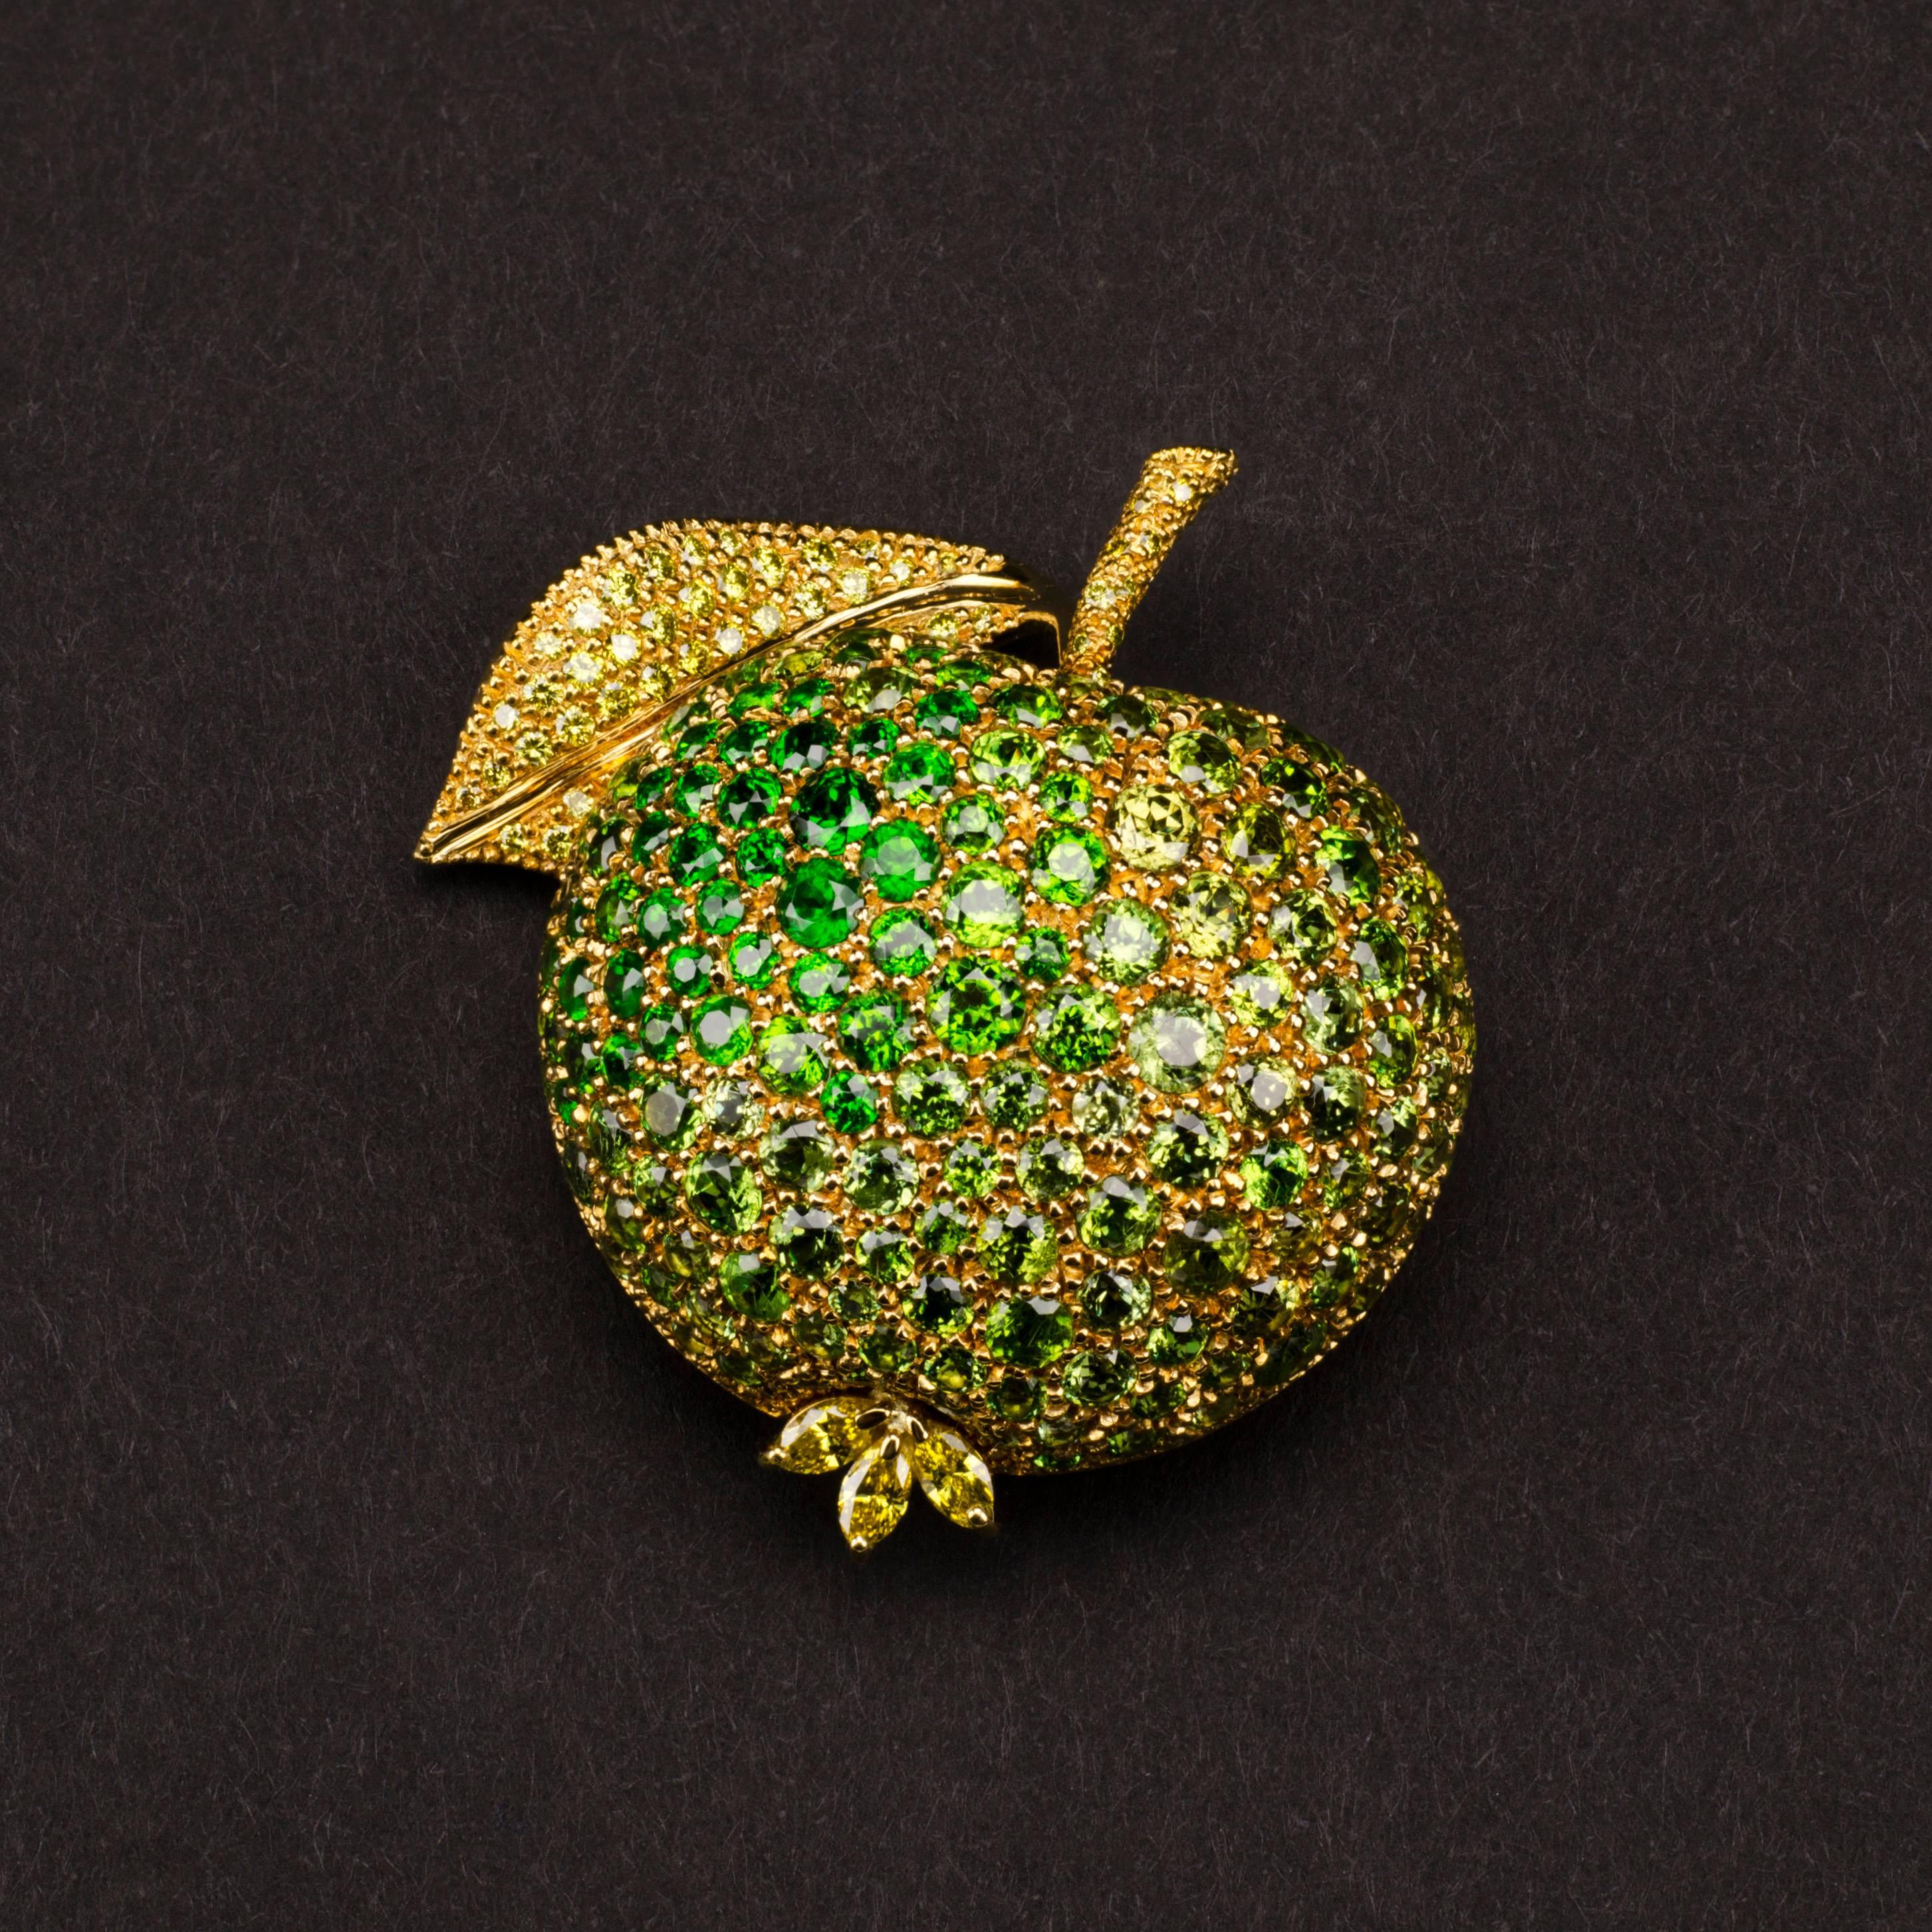 ‘You are the apple of my eye’, a quote perhaps best known for its romantic Shakespearian origins in A Midsummer Night’s Dream.
This 18ct yellow gold brooch from Henn, featuring the rarest demantoide garnets from Pakistan, is a fitting tribute to the